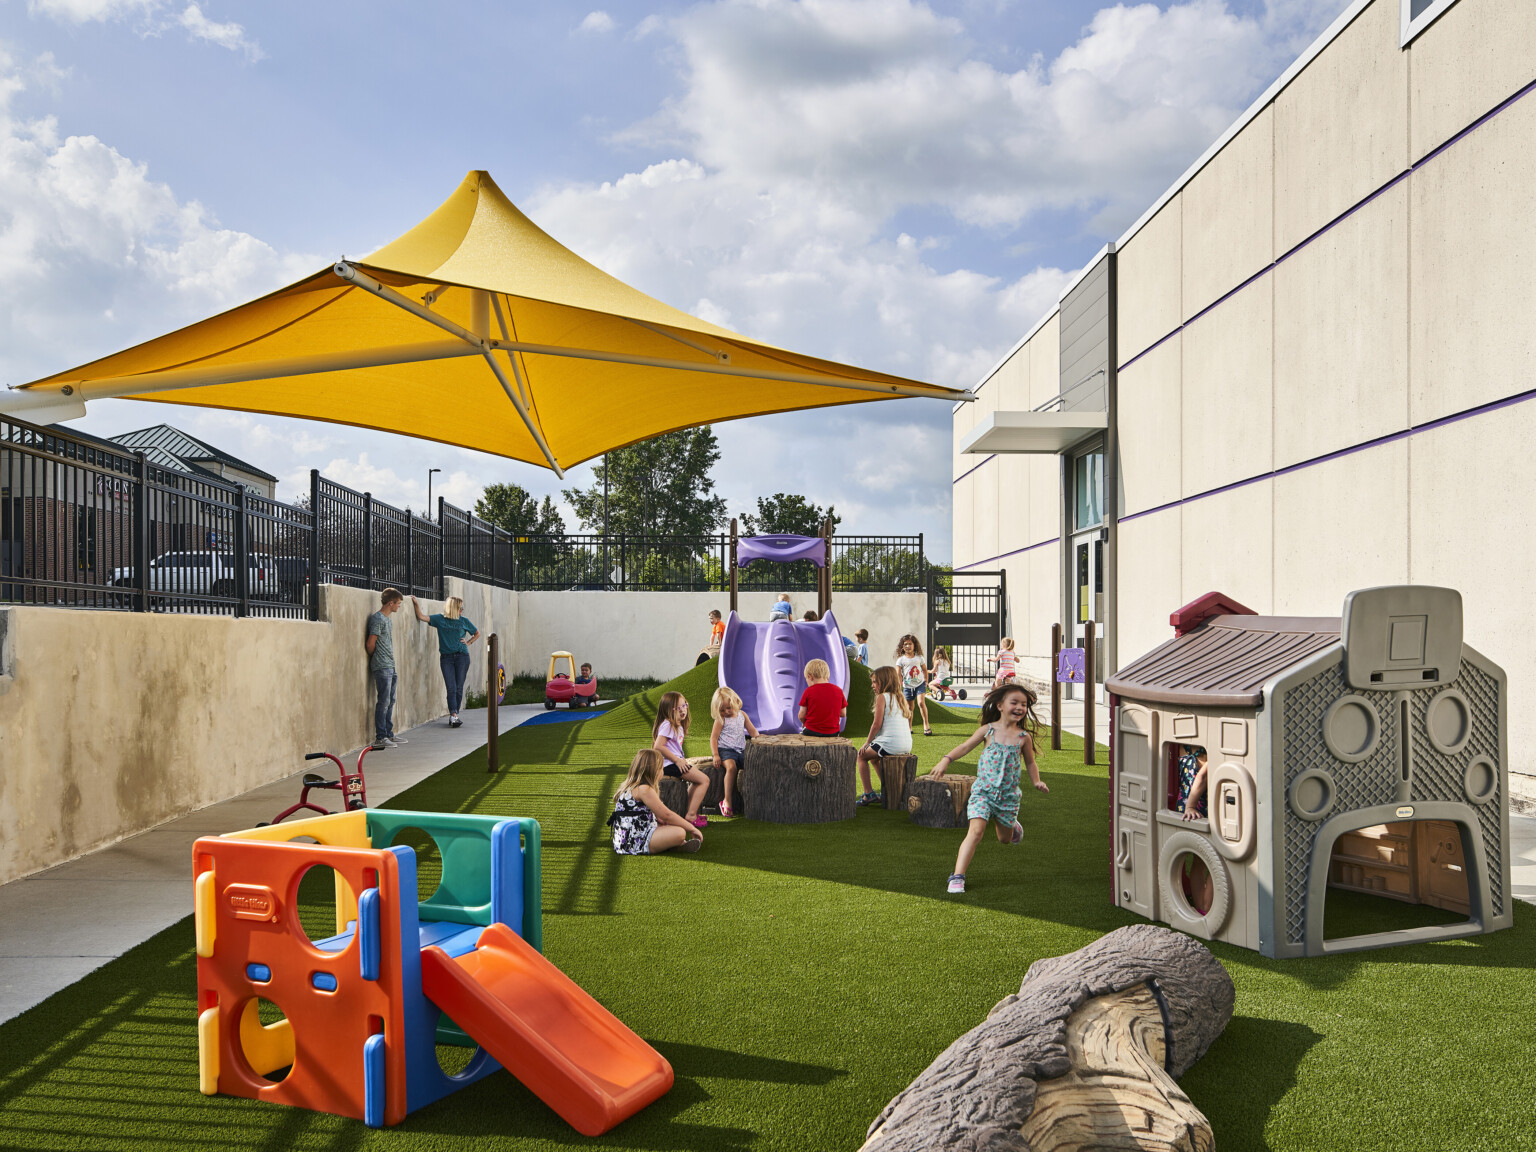 Playground with turf outside concrete building with yellow area umbrella partially covering. Man made hill with purple slide